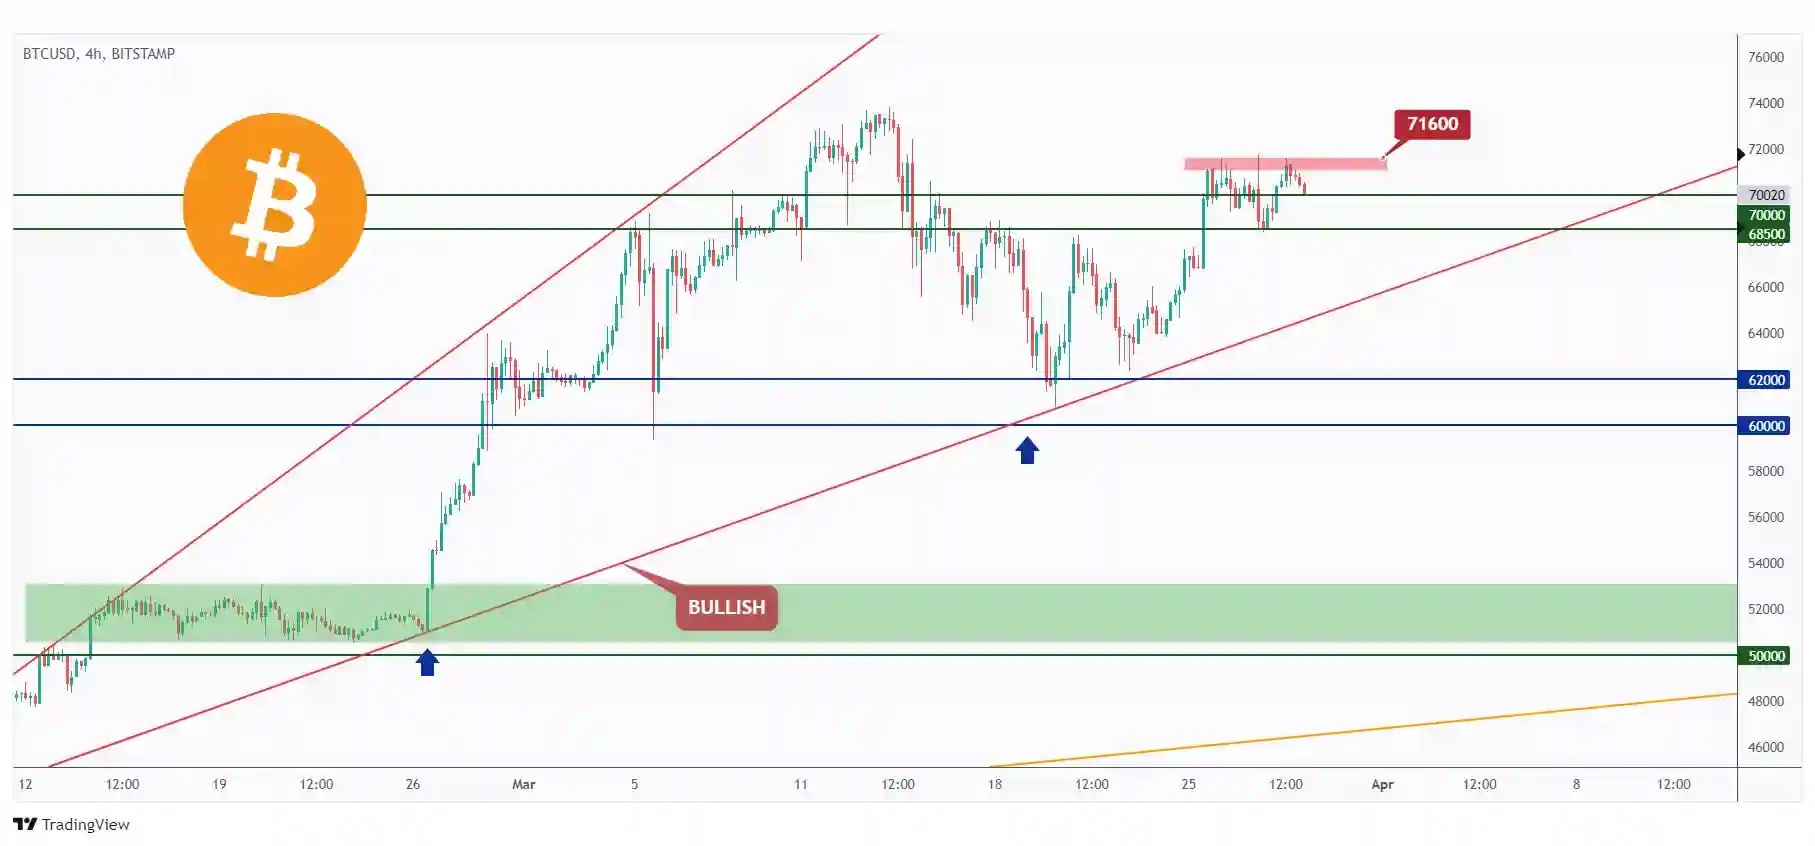 BTC 4h chart overall bullish trading within a rising wedge pattern and showing the last major high at $71,600 that we need a break above for the bulls to maintain control.